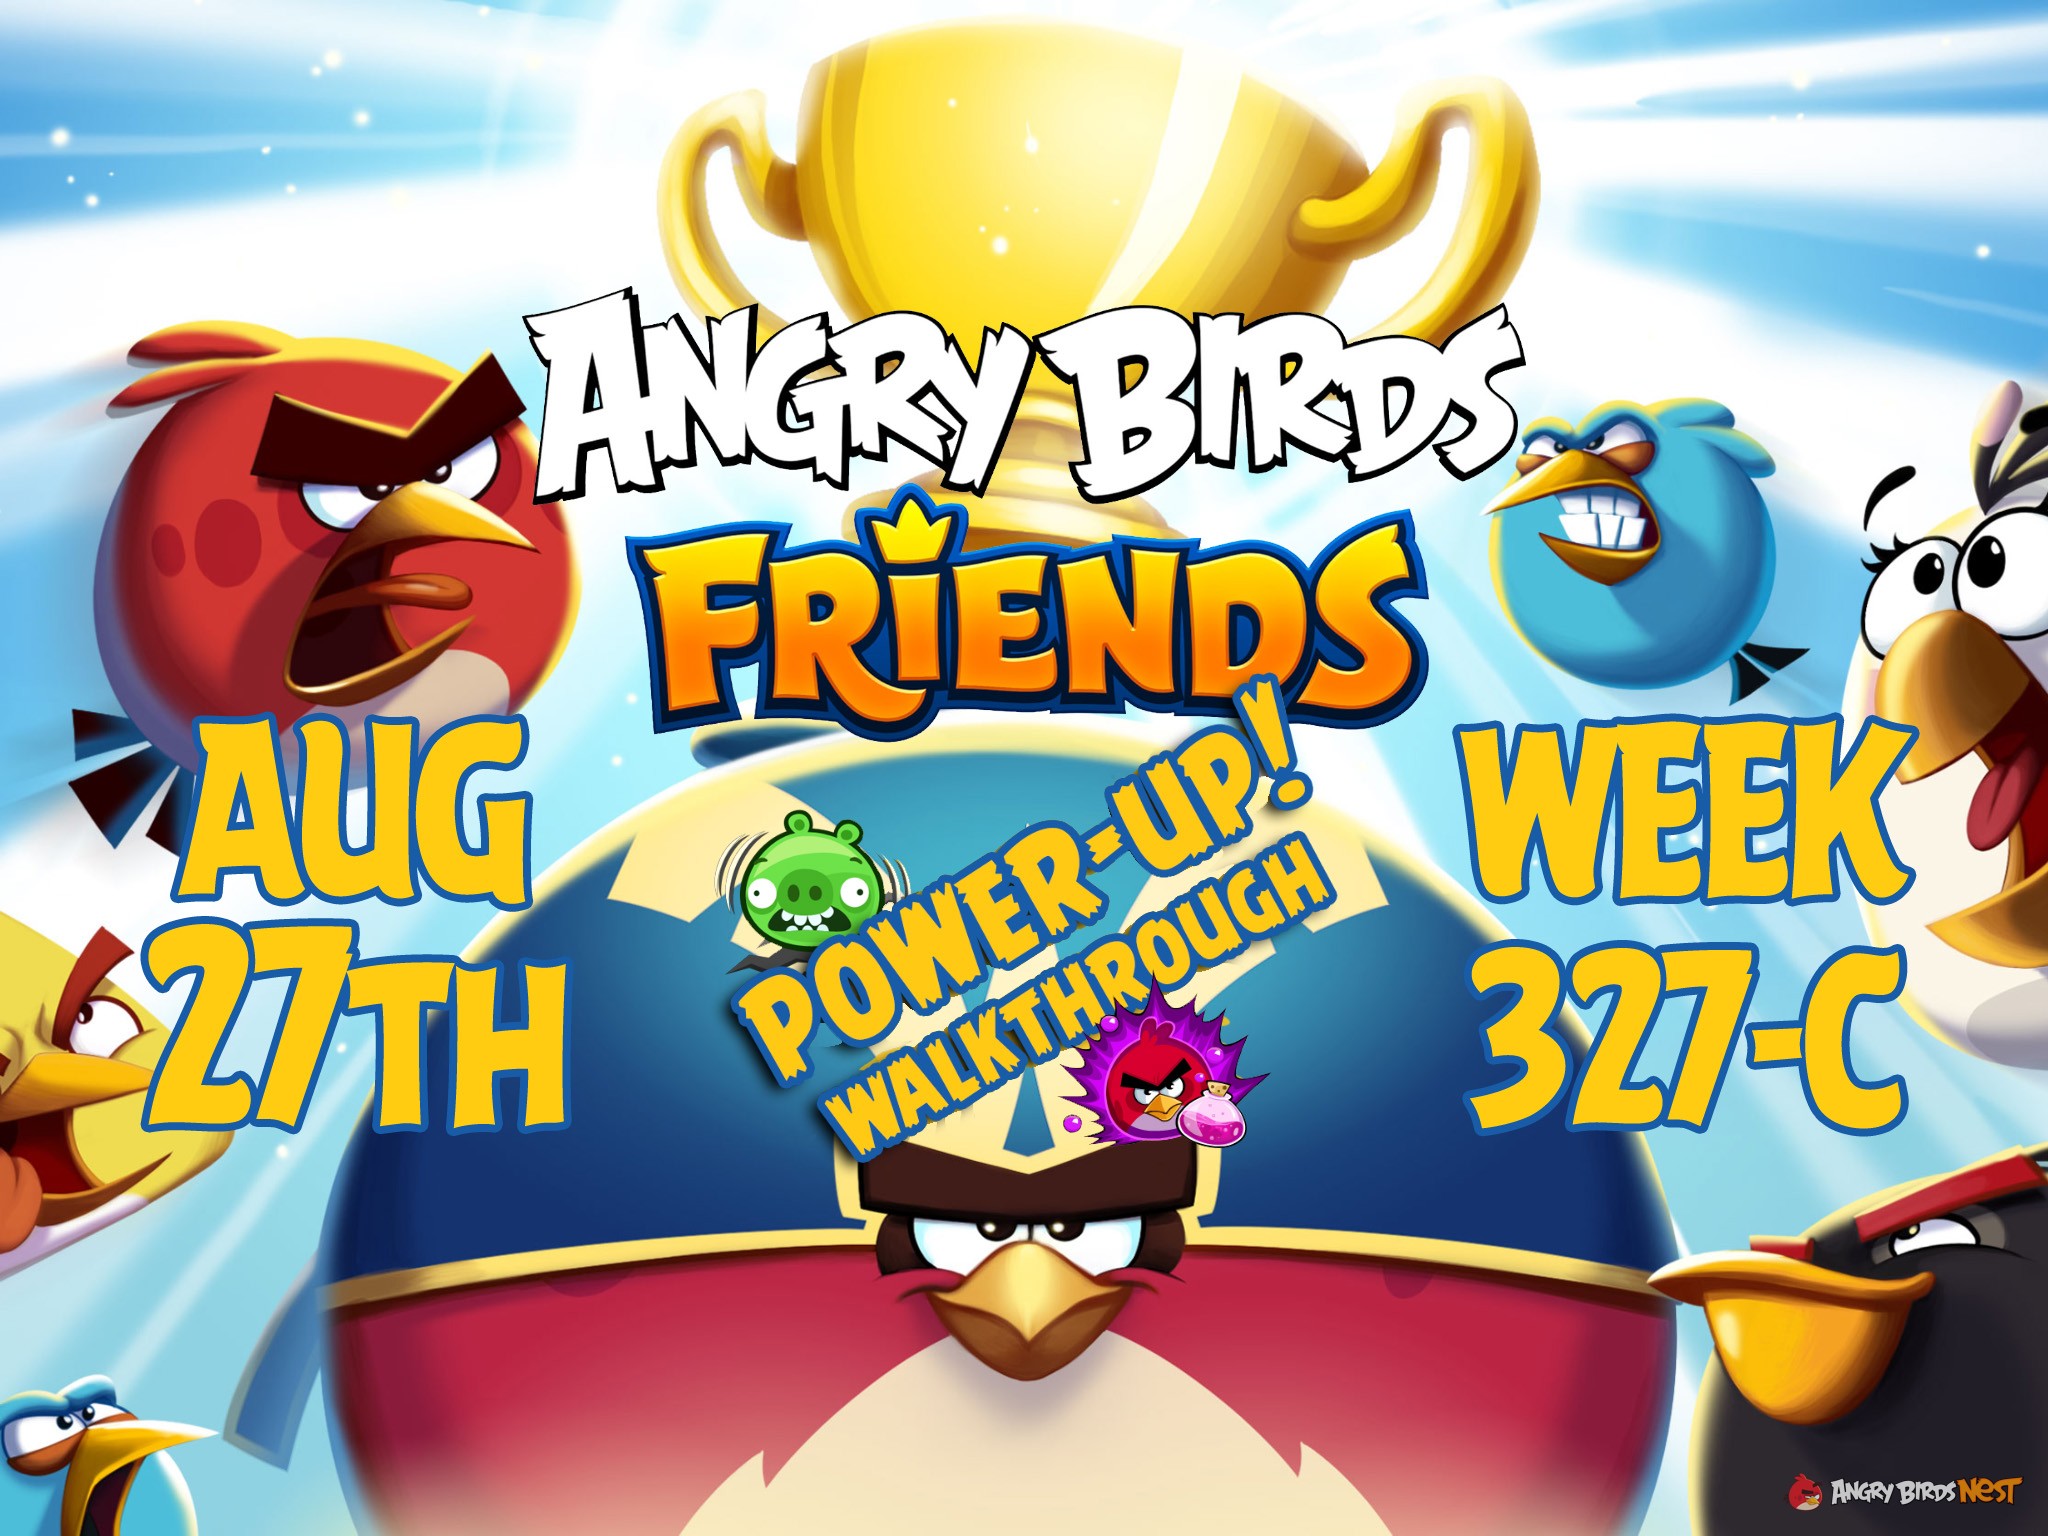 Angry-Birds-Friends-Tournament-Week-327-C-Feature-Image-PU